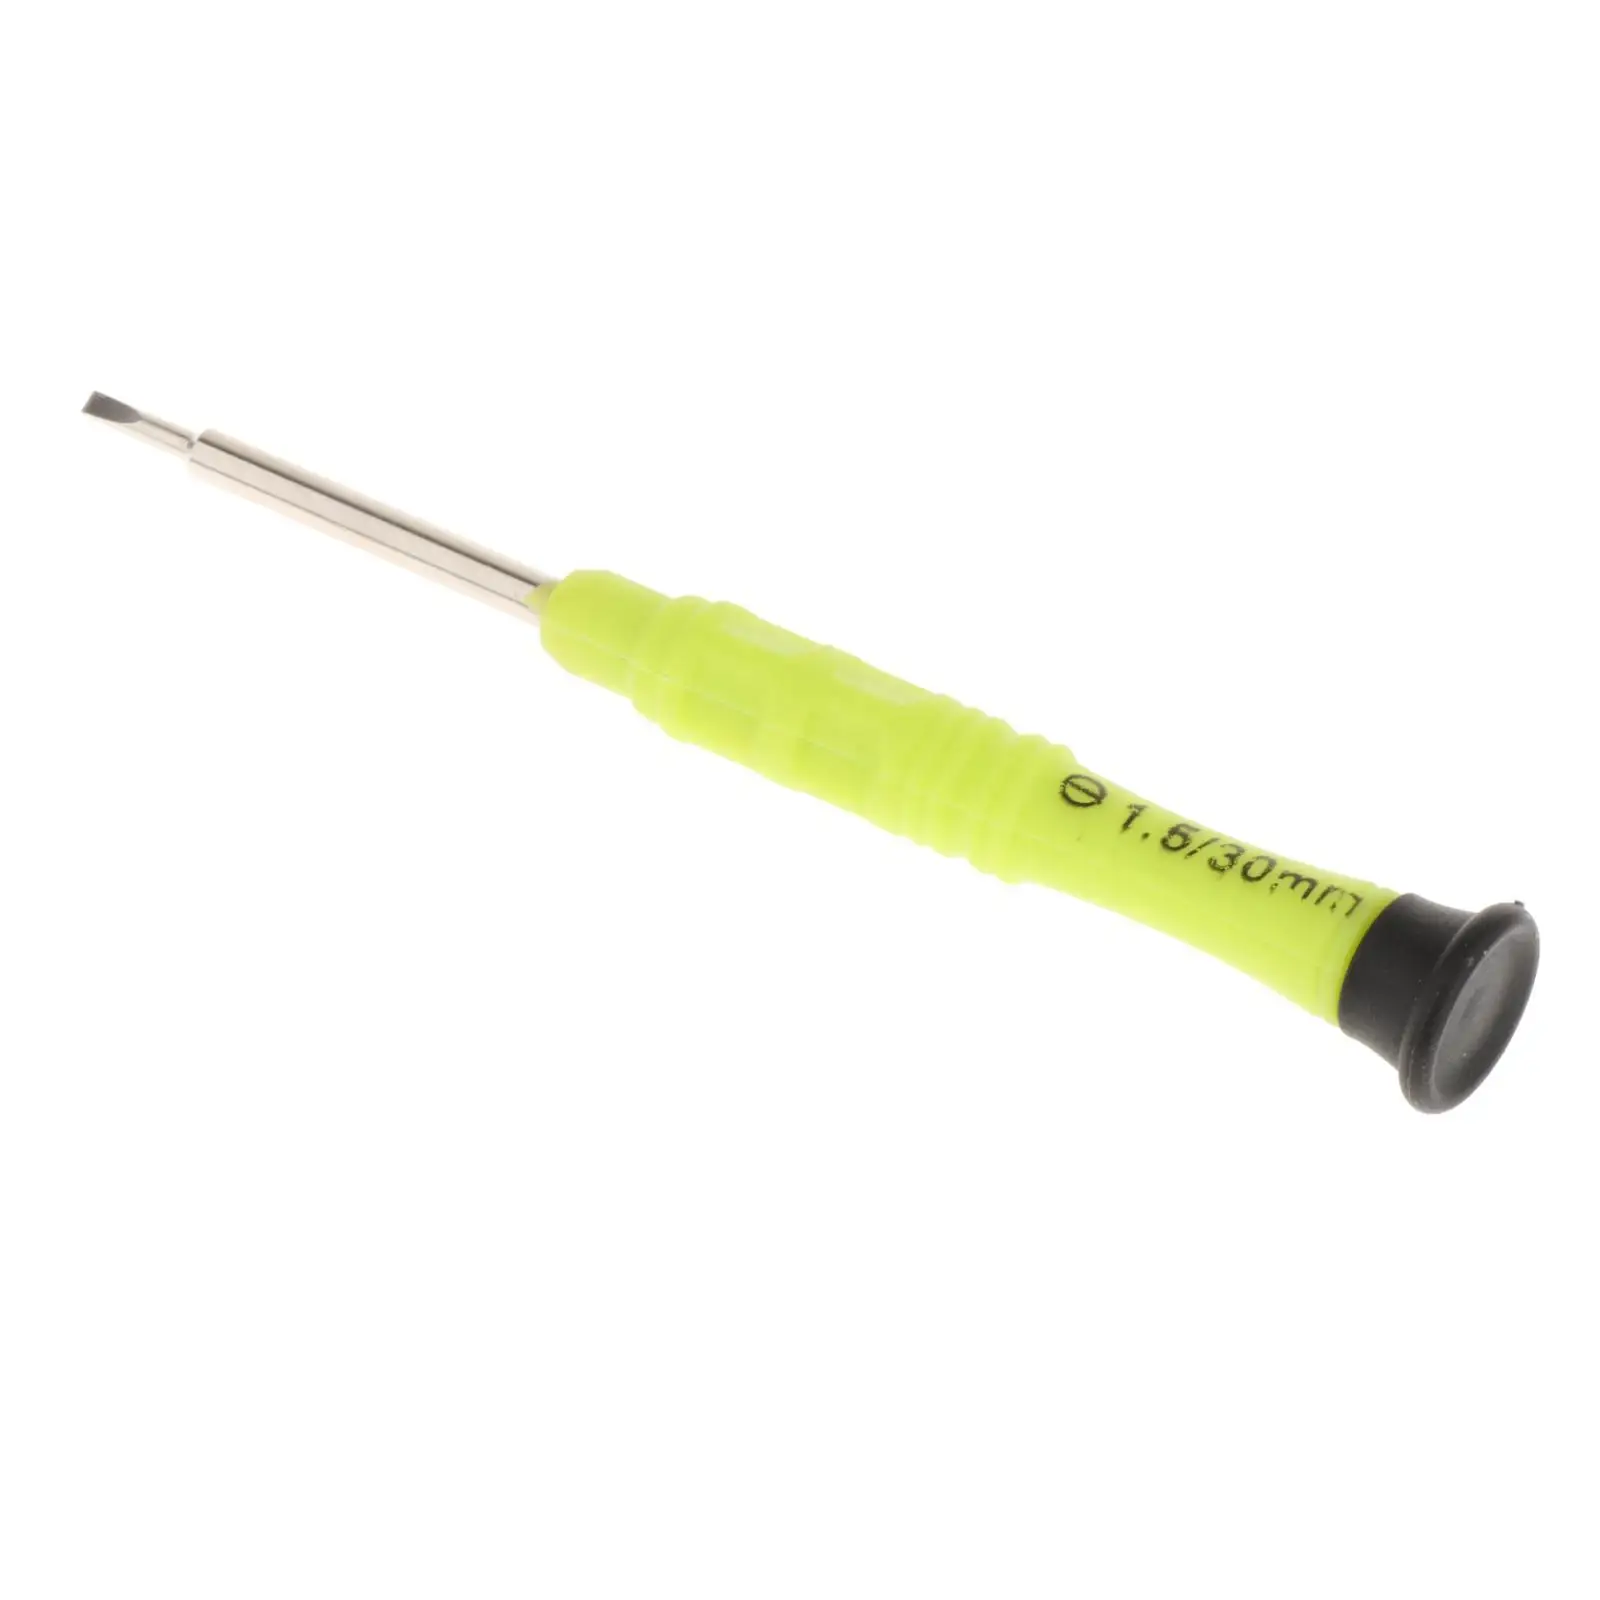 Epee Fencing Screwdriver Professional Hand Tool for Epee Foil